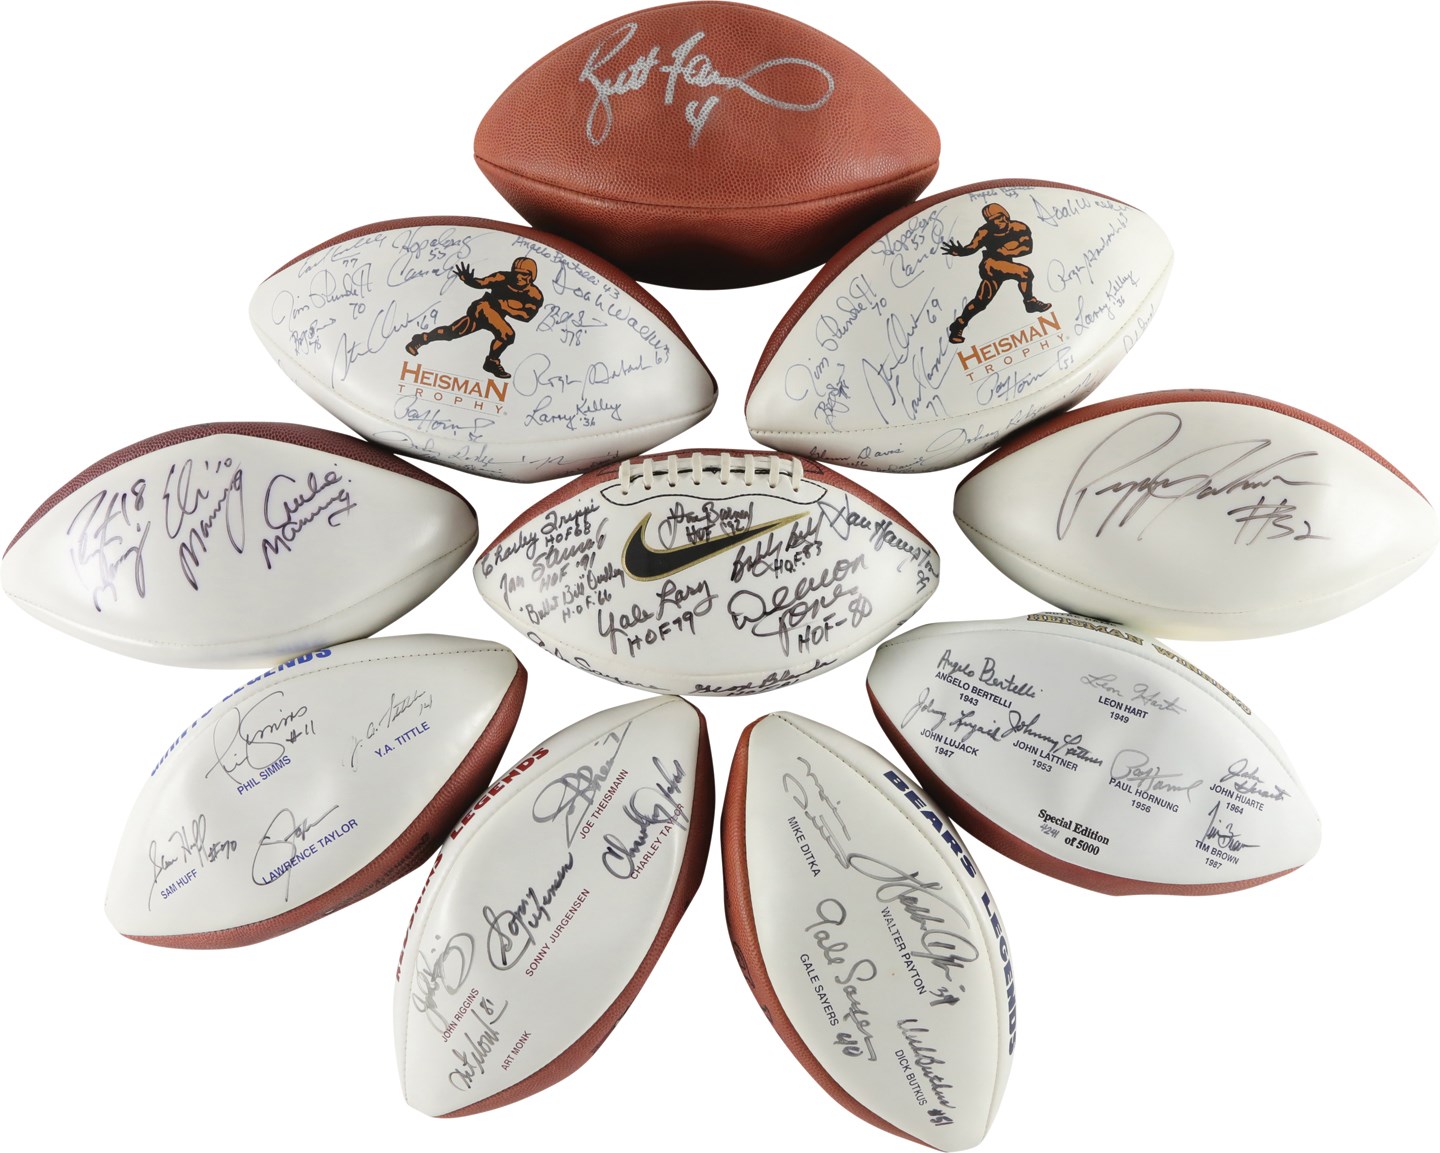 Football - Football HOFers and Legends Signed Football Collection (10) w/Walter Payton & Heisman Winners (90 Autographs)